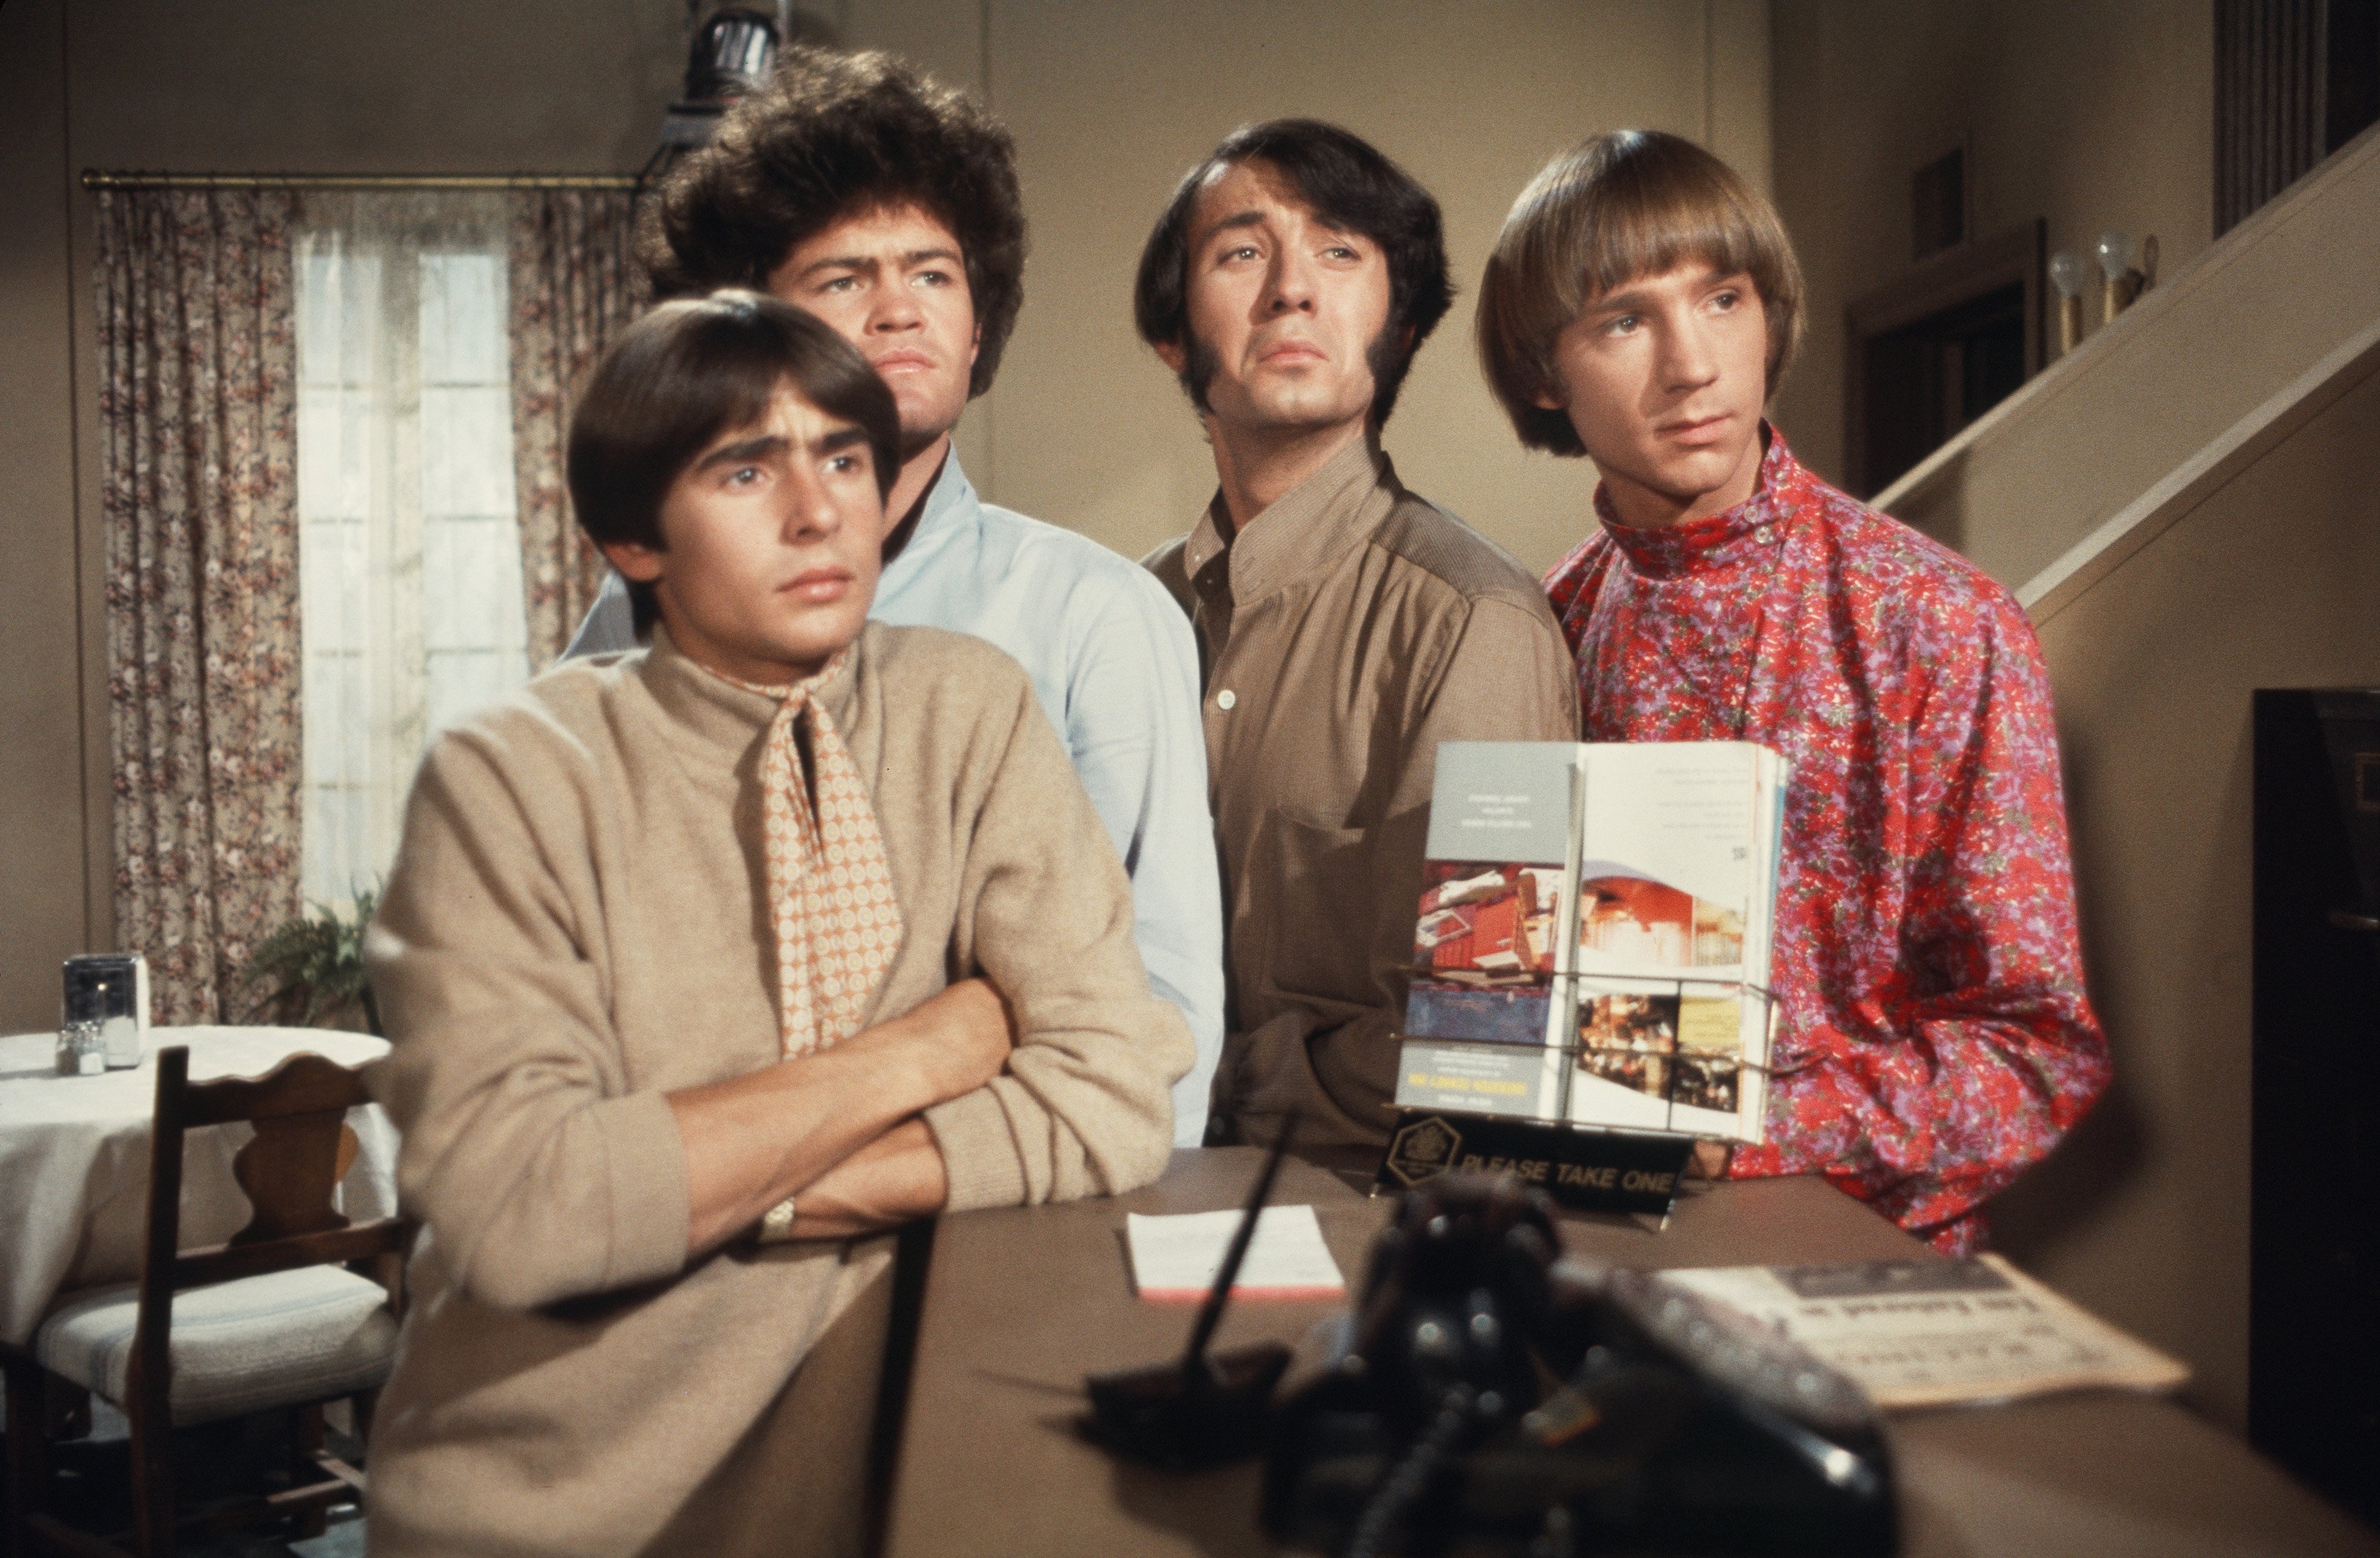 Why The 1st Takes of The Monkees’ Theme Song Were Unusable